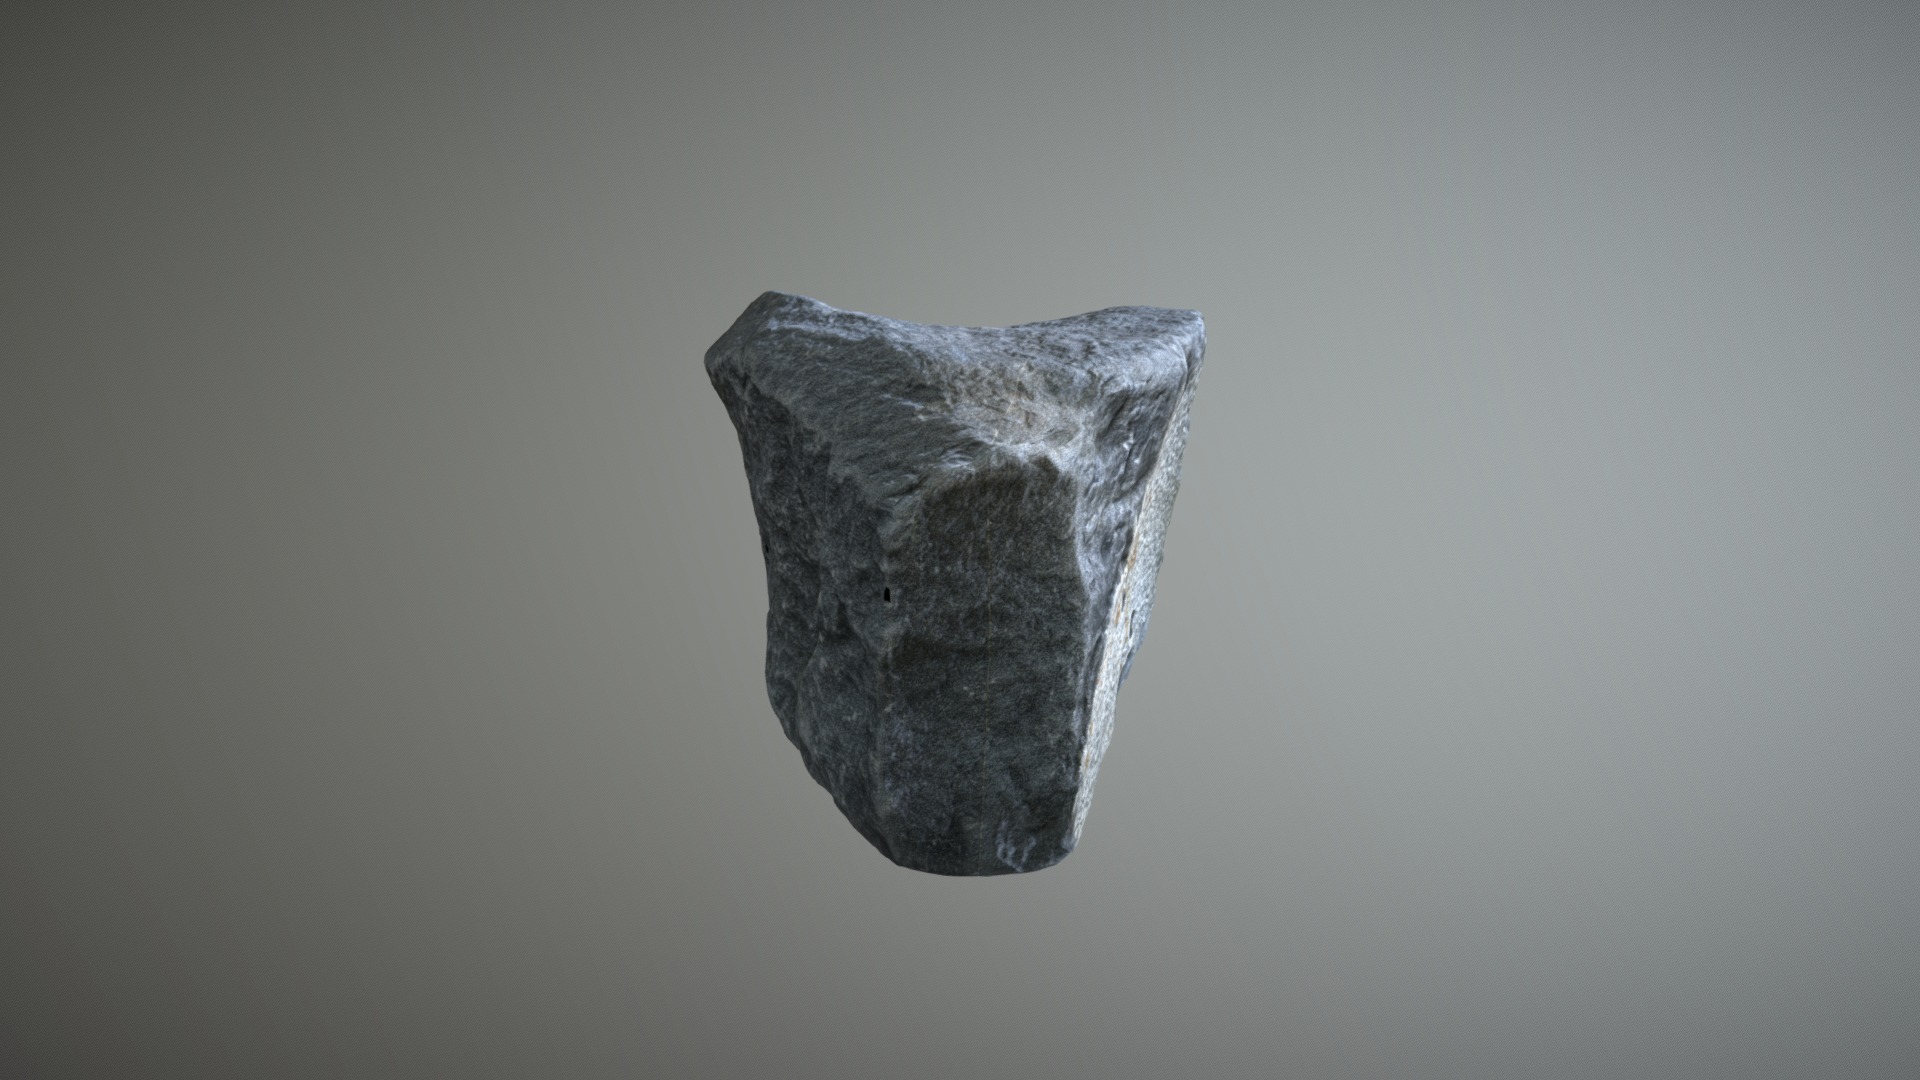 3D model Boulder Photogrammetry - This is a 3D model of the Boulder Photogrammetry. The 3D model is about a rock with a rough surface.